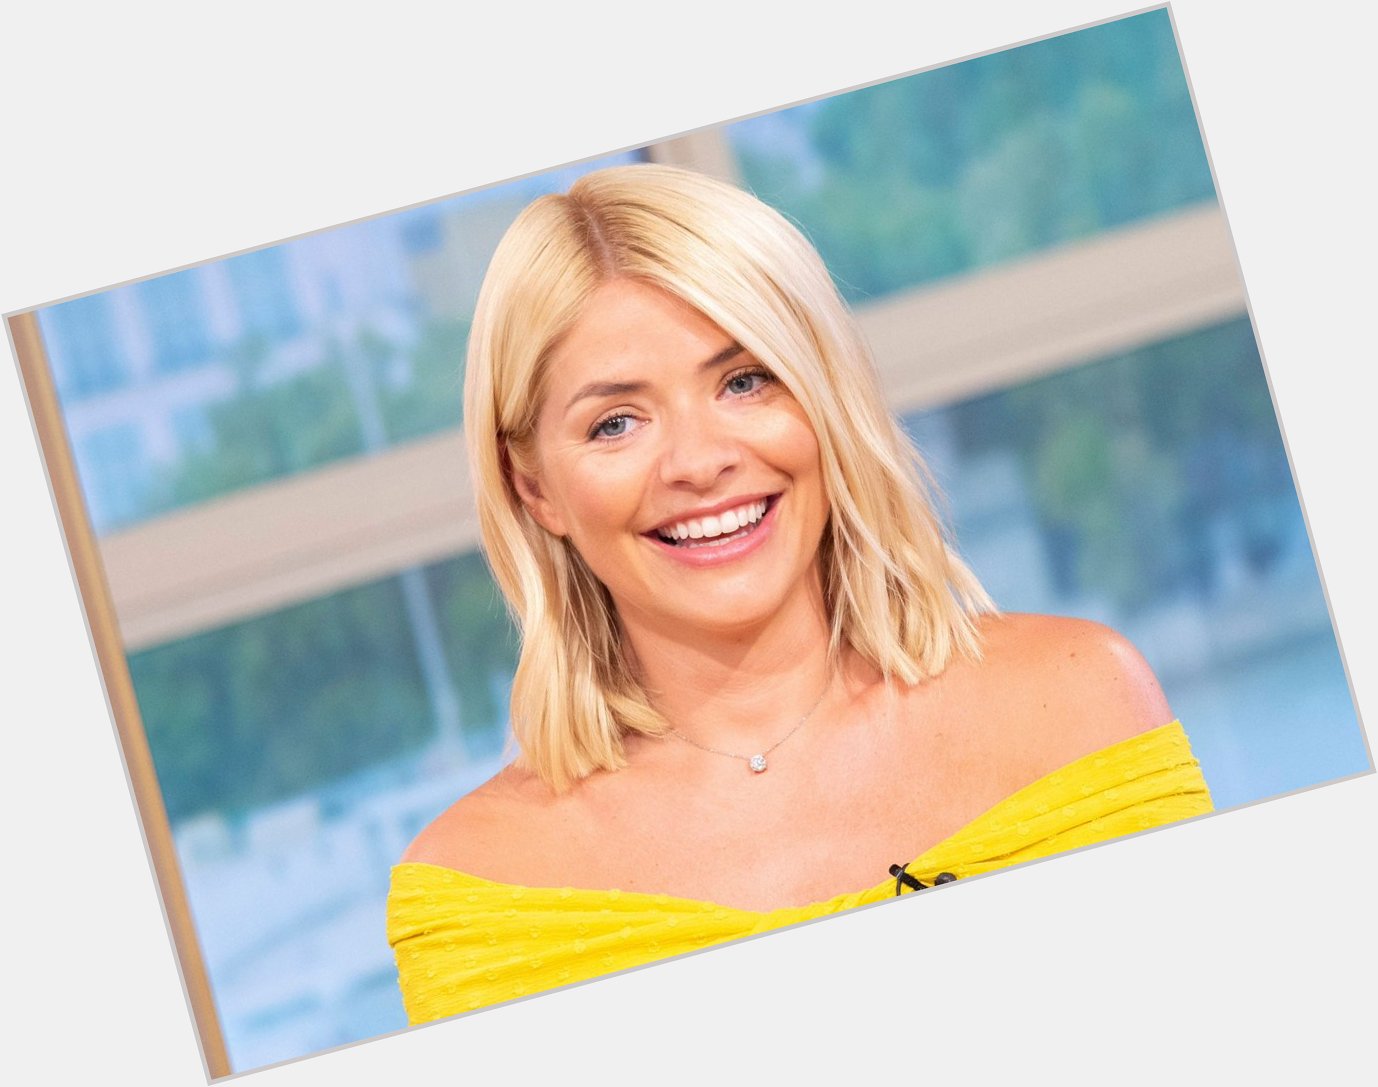 A happy birthday to Good Morning presenter, Holly Willoughby, 40 today. COYS 